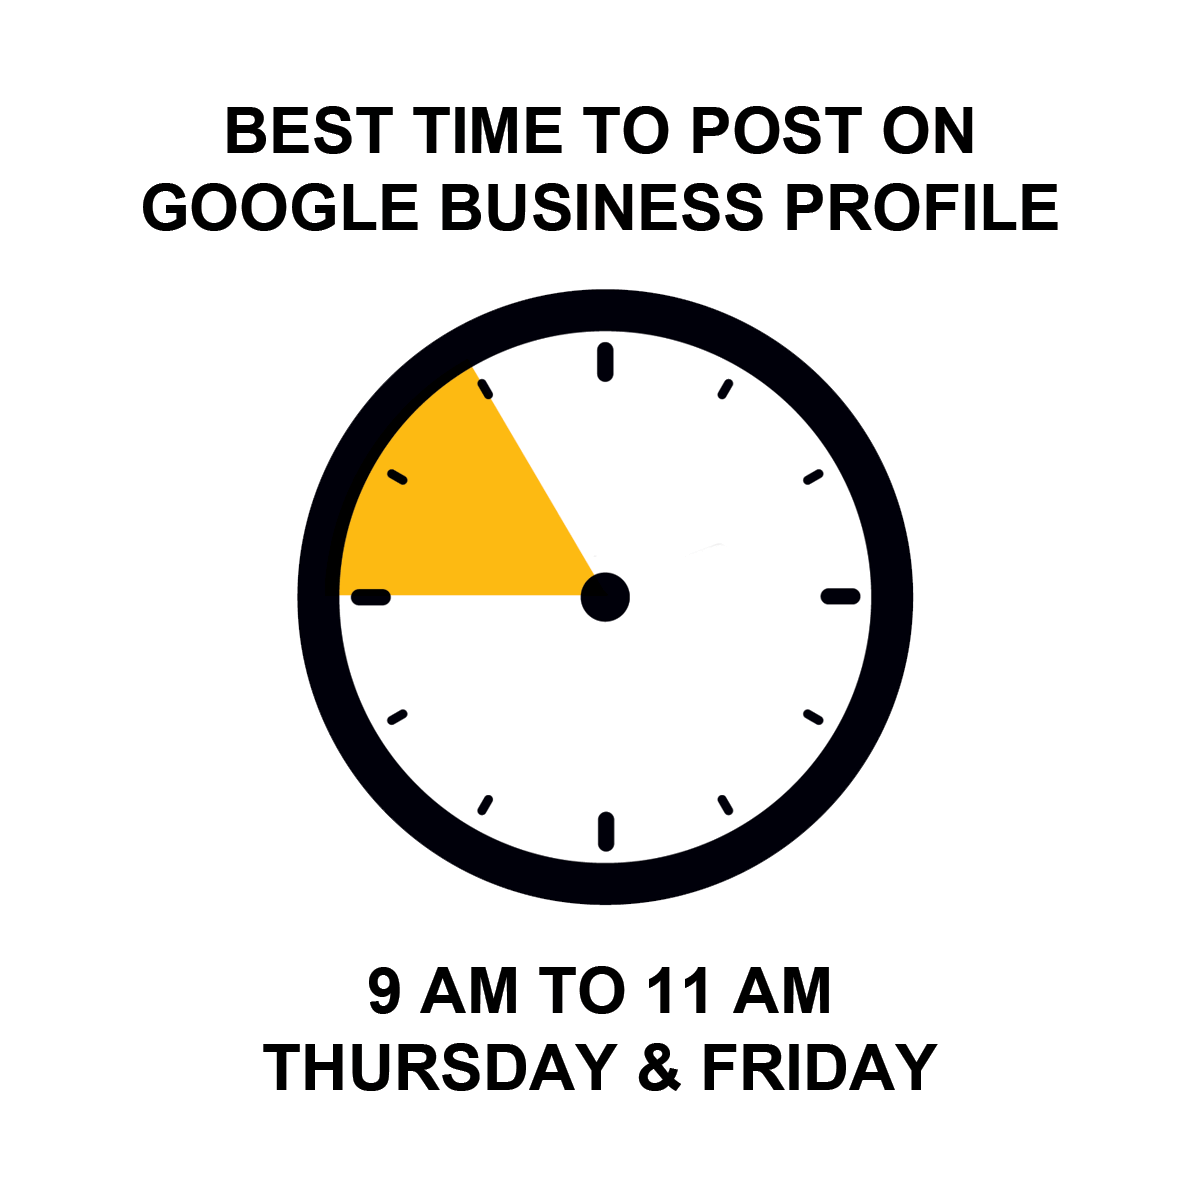 Best Time to Post On Google Business Profile: 9 AM to 11 AM Thursday and Friday